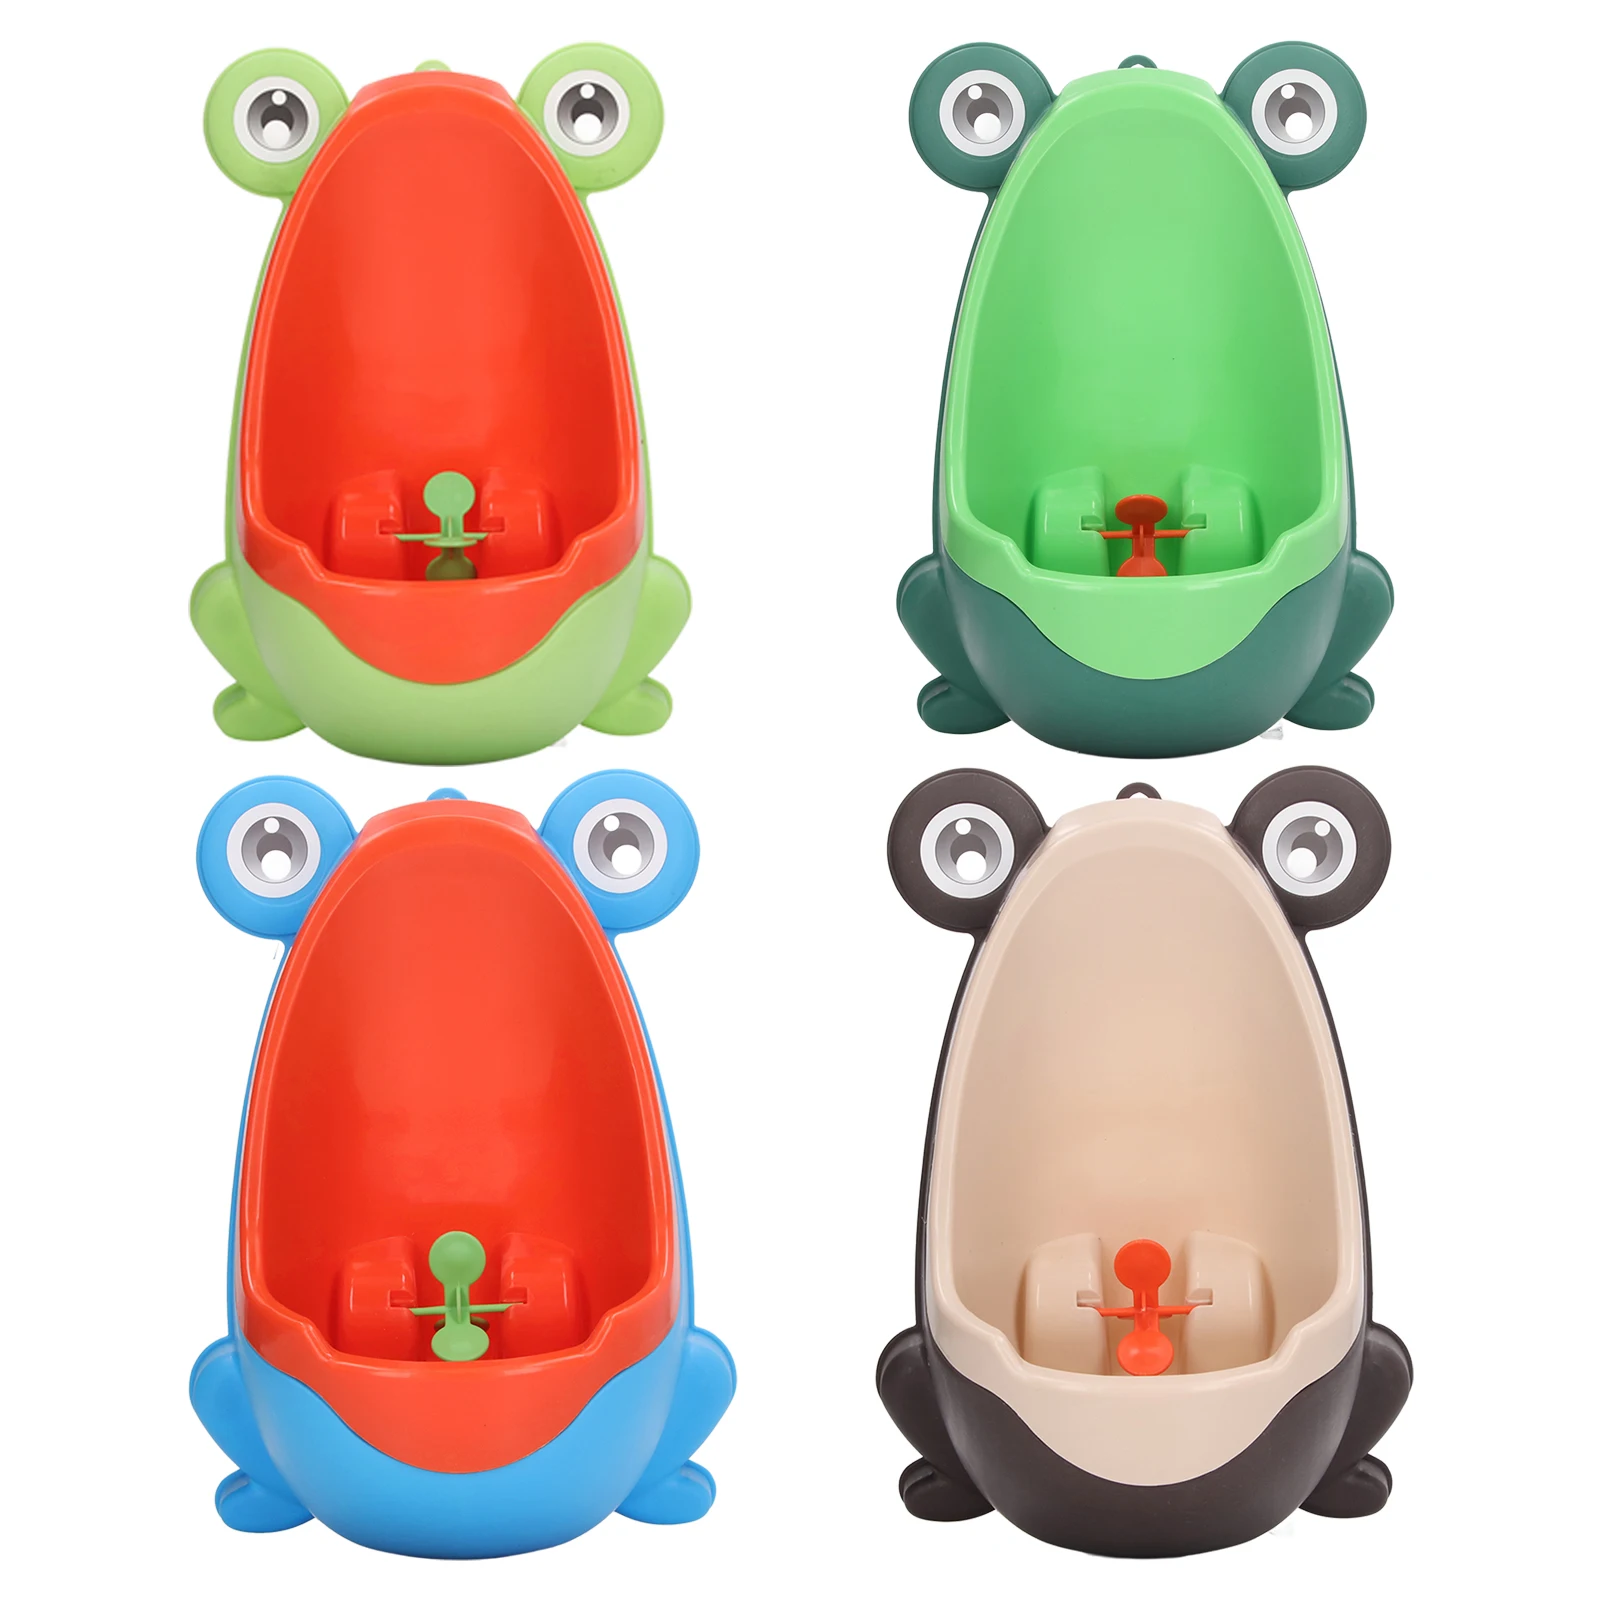 portable baby potty plastic children s toilet pot training seat with cover fashion cartoon bedpan boys girls urinal easy clean Baby Boys Standing Potty Shape Wall-Mounted Urinals Toilet Training Children Stand Vertical Urinal Potty